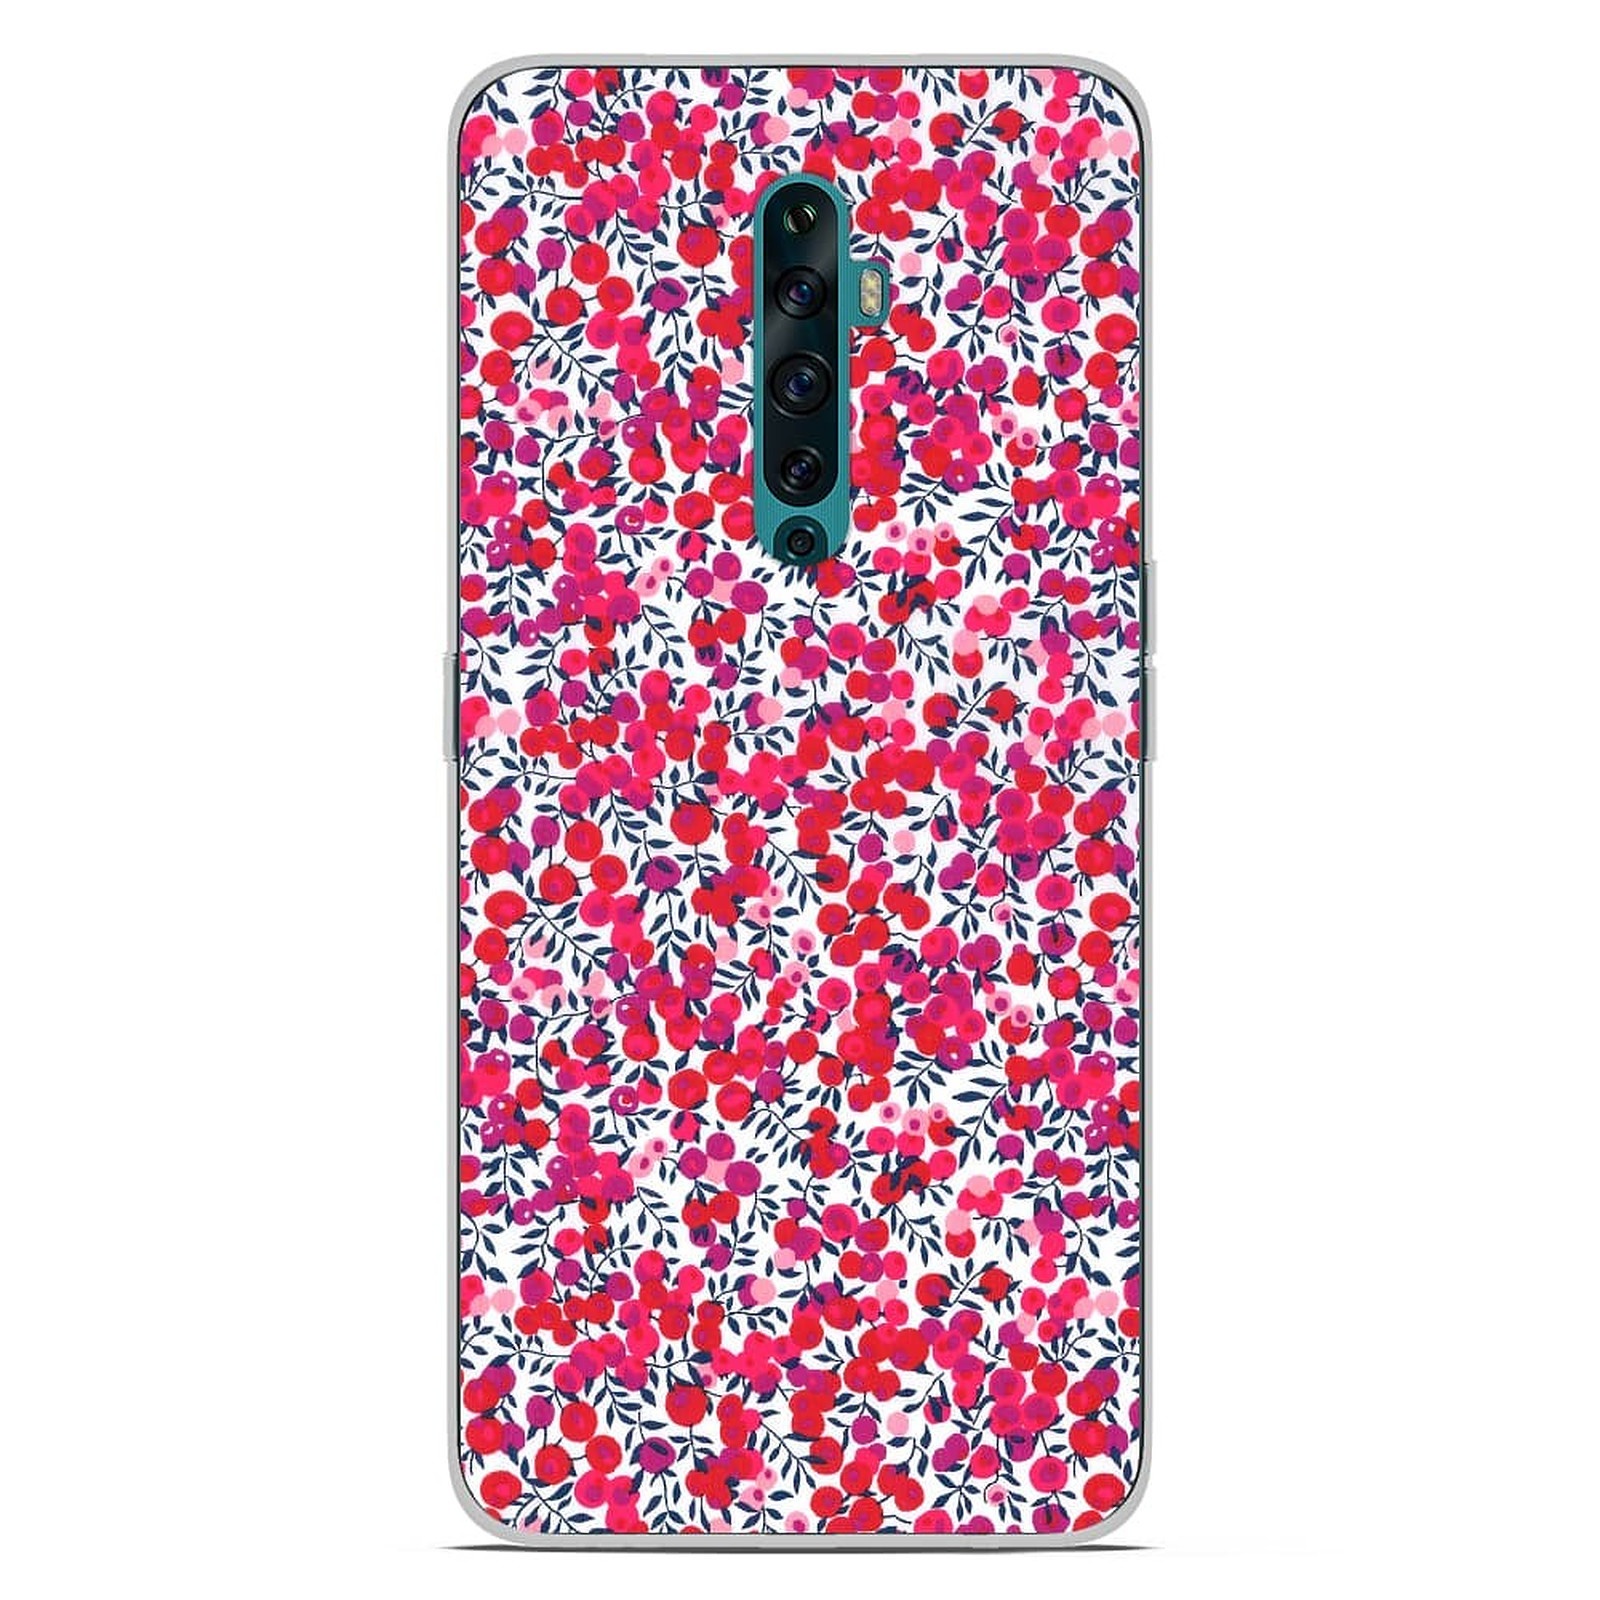 1001 Coques Coque silicone gel Oppo Reno 2Z motif Liberty Wiltshire Rouge - Coque telephone 1001Coques